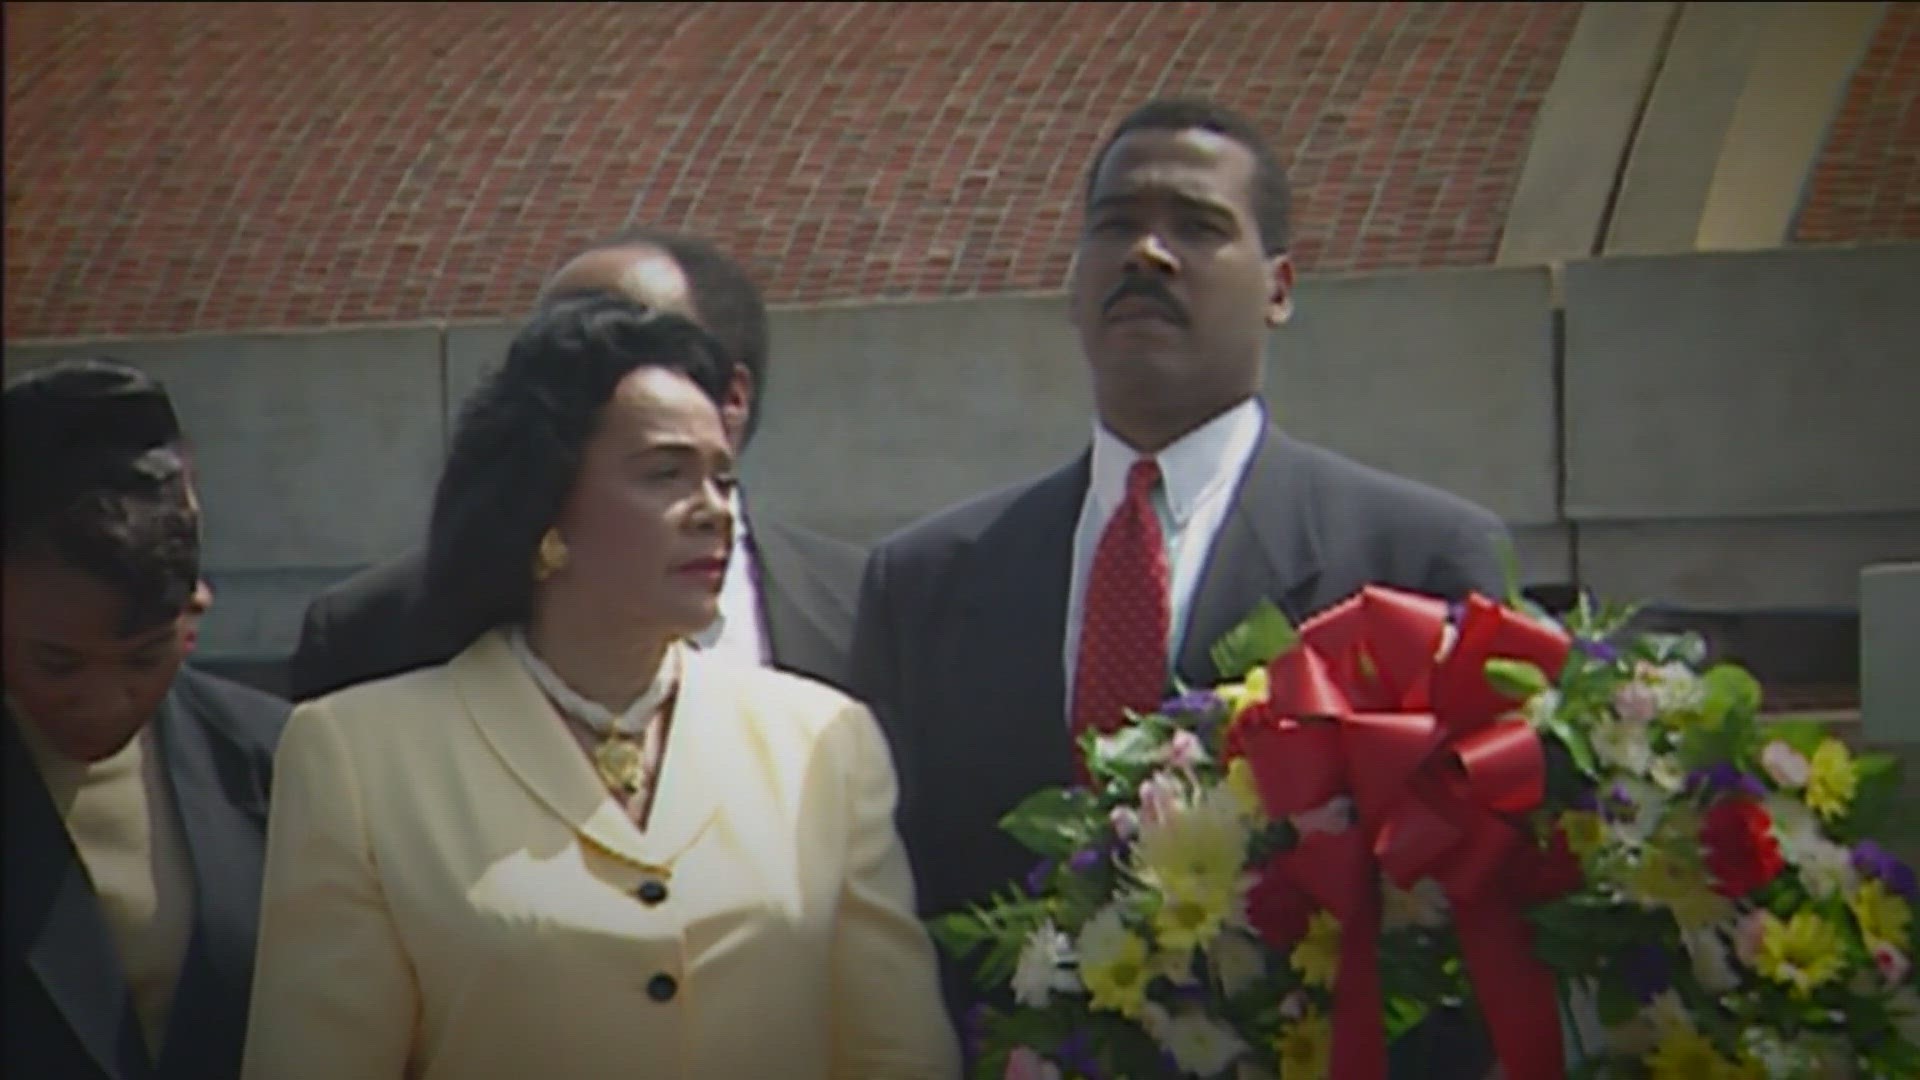 Dexter Scott King, Dr. King's Youngest Son, Passes Away At 62